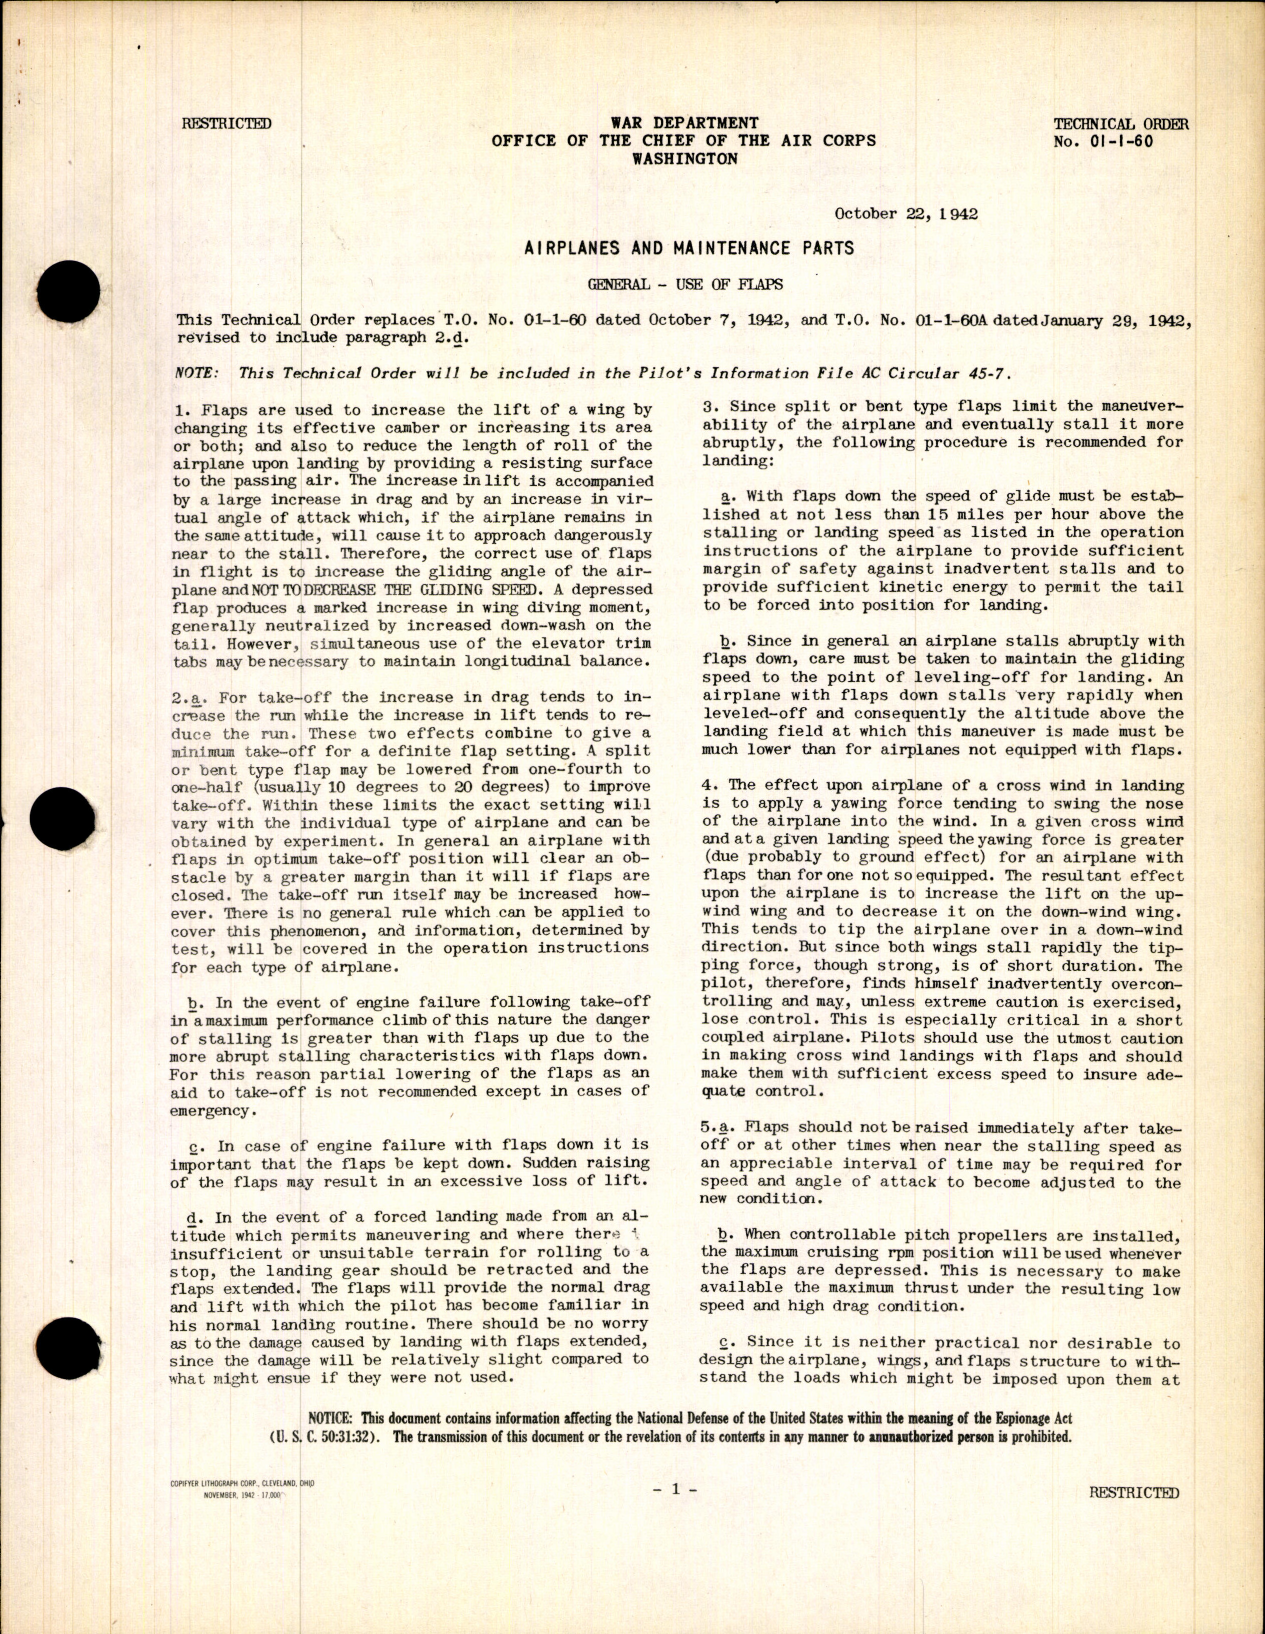 Sample page 1 from AirCorps Library document: Airplanes and Maintenance Parts for Use of Flaps